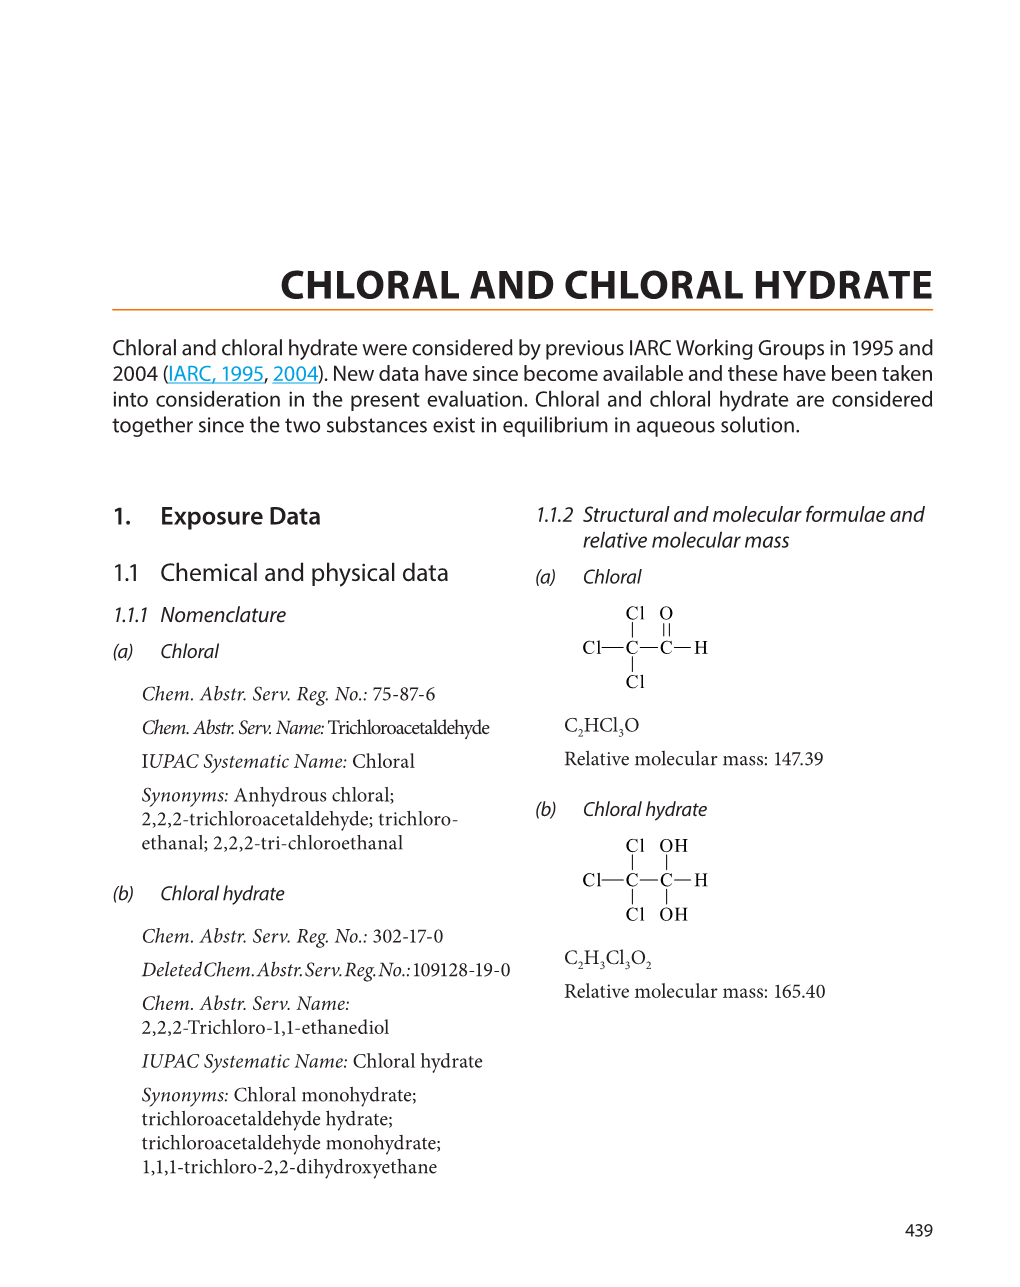 Chloral and Chloral Hydrate